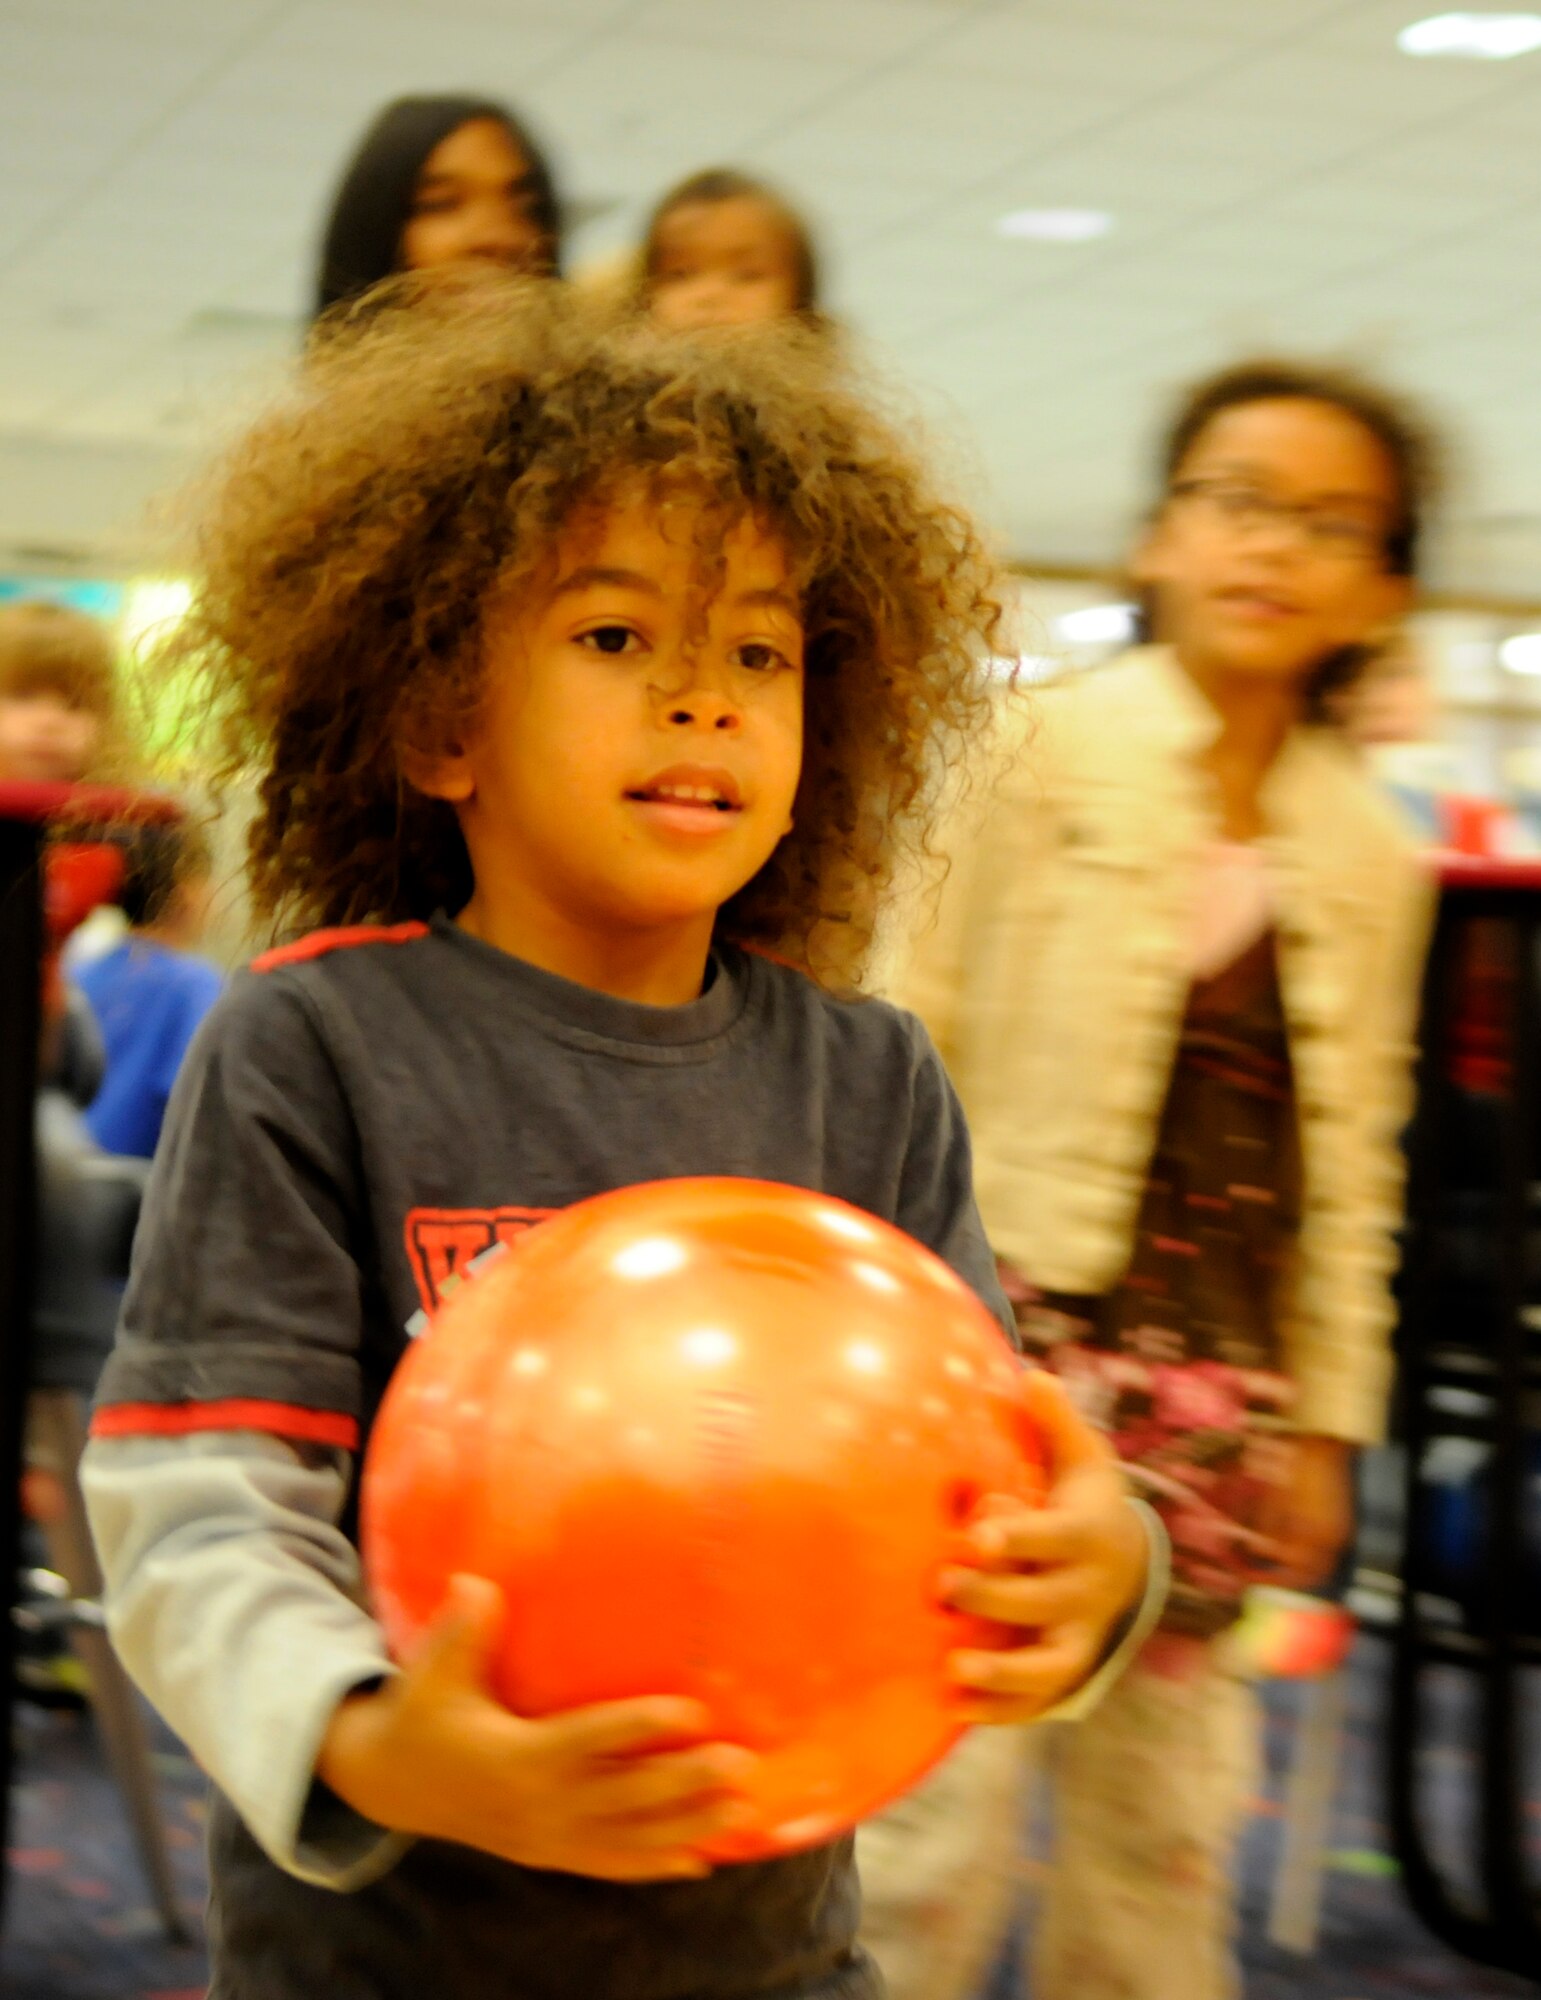 RAF MILDENHALL, England -- Rockie Henriquez, son of Master Sgt. Erasmus Henriquez, 352nd Special Operations Group, gets ready to bowl during a celebration for all the children who completed the summer reading program Aug. 15.  The program required children to read 10 books or 10 hours over the summer.  (U.S. Air Force photo by Staff Sgt. Christopher L. Ingersoll)